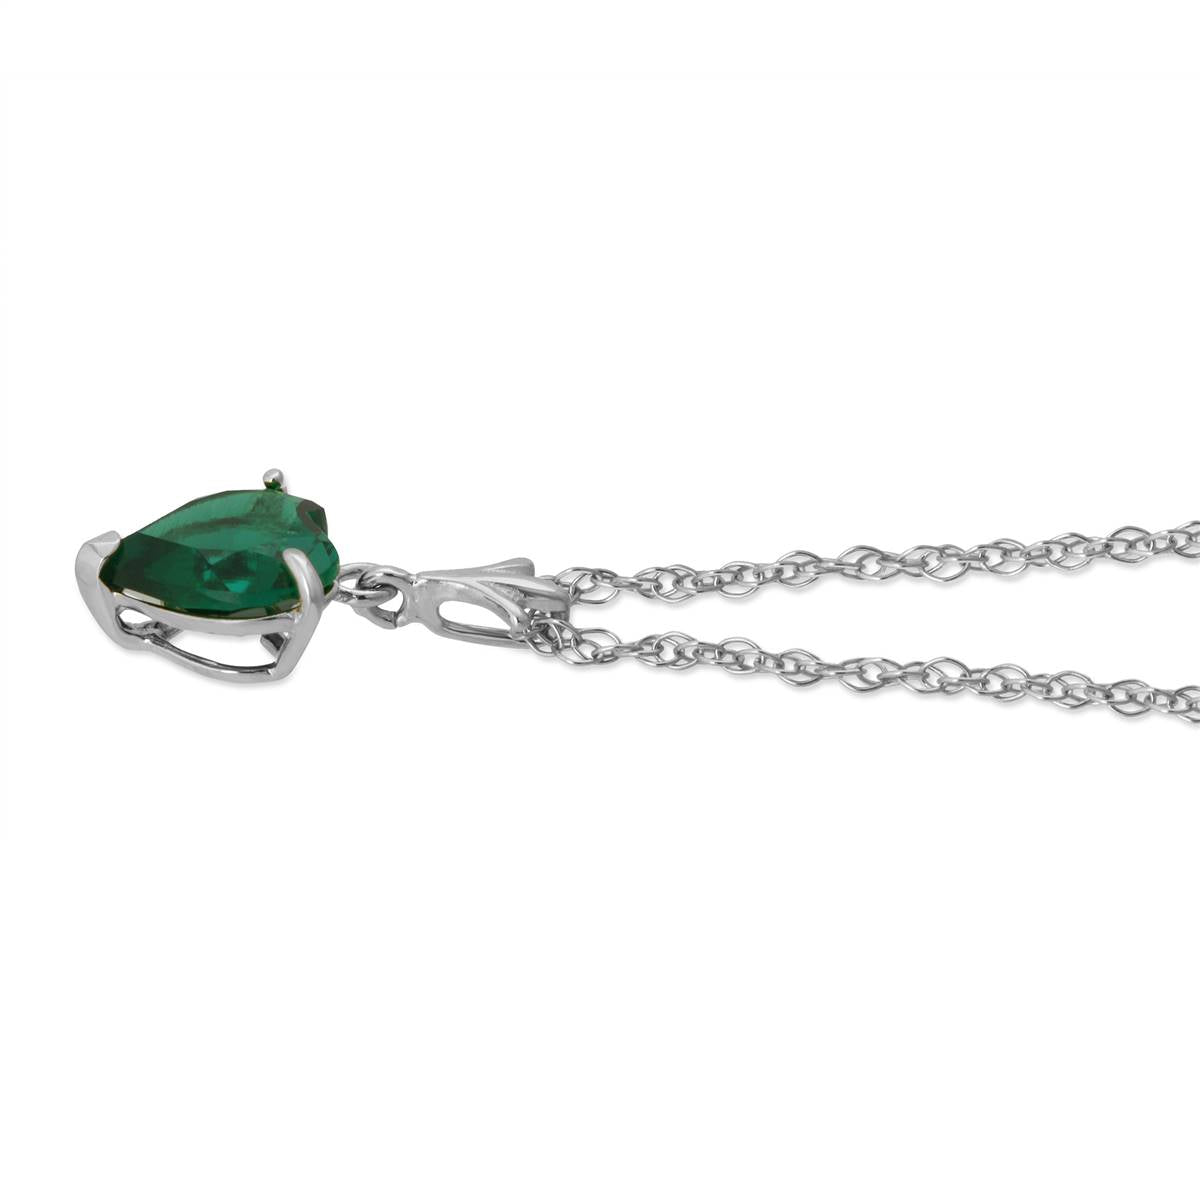 14K Solid White Gold Necklace With Heart Shape 1.00 ctw High Polished Genuine Emerald - Grade AAA